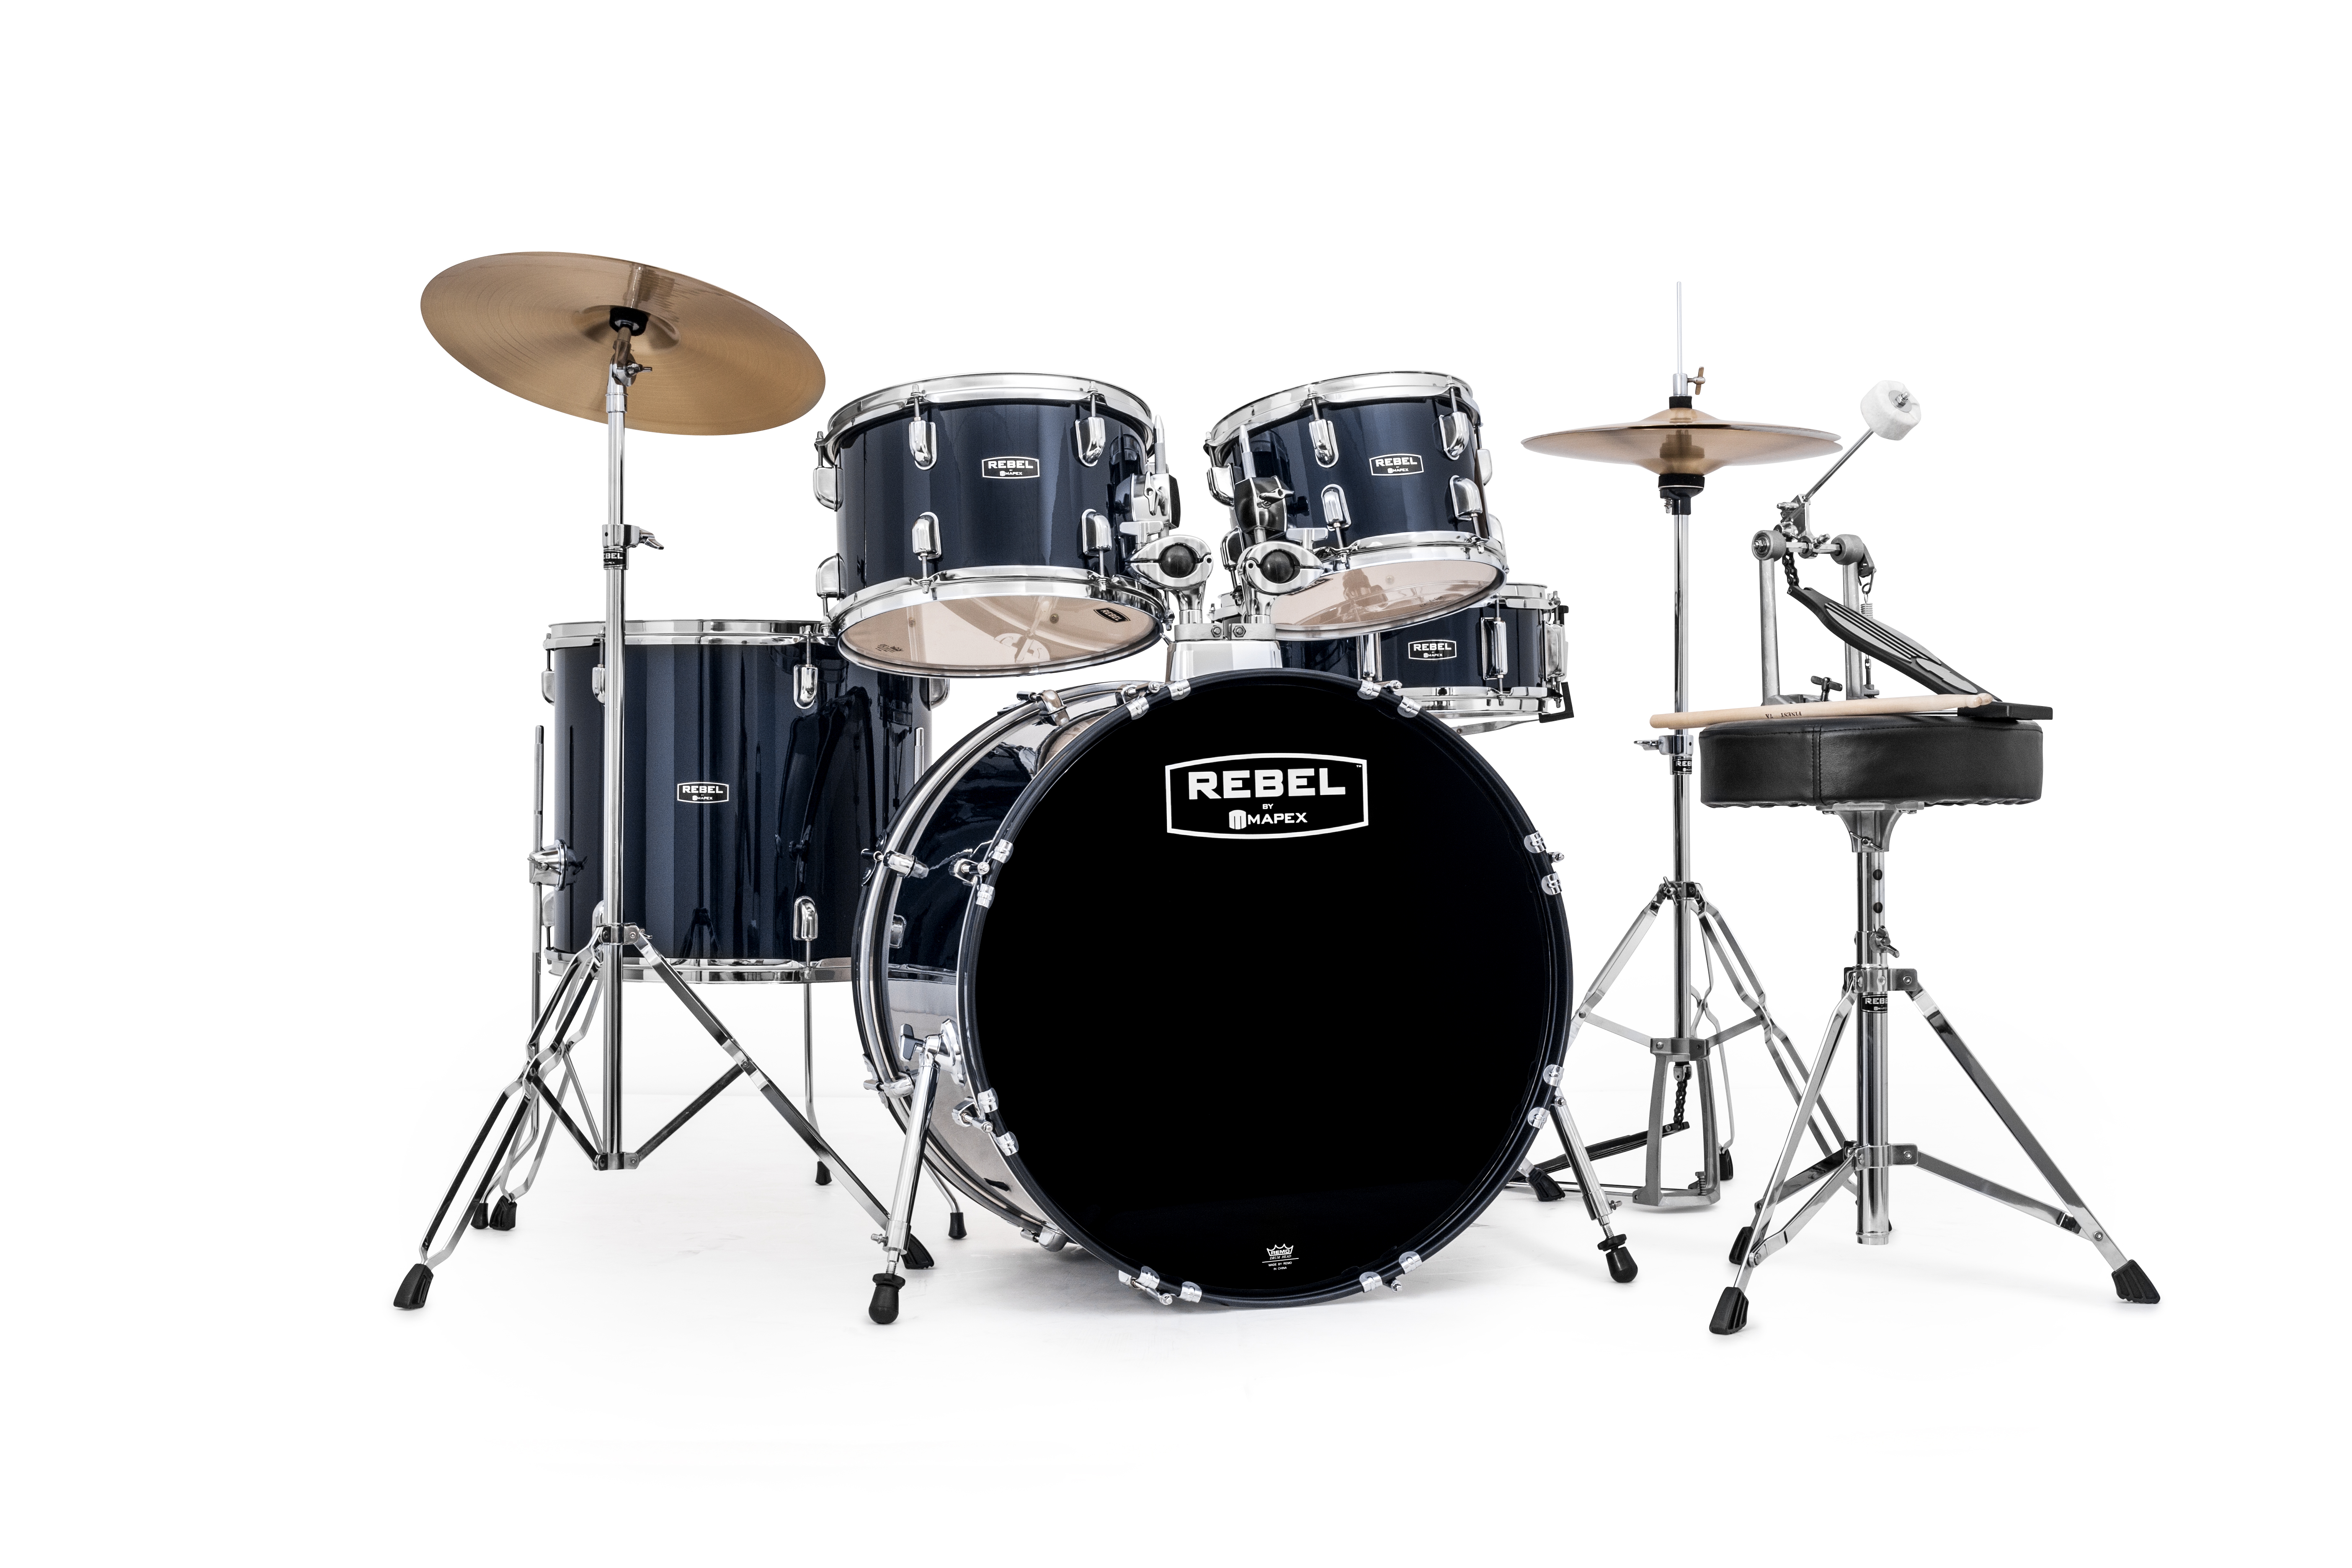 Mapex Rebel 5-piece SRO Complete Set Up with Fast Size Toms - RB5294FTCYB - Royal Blue